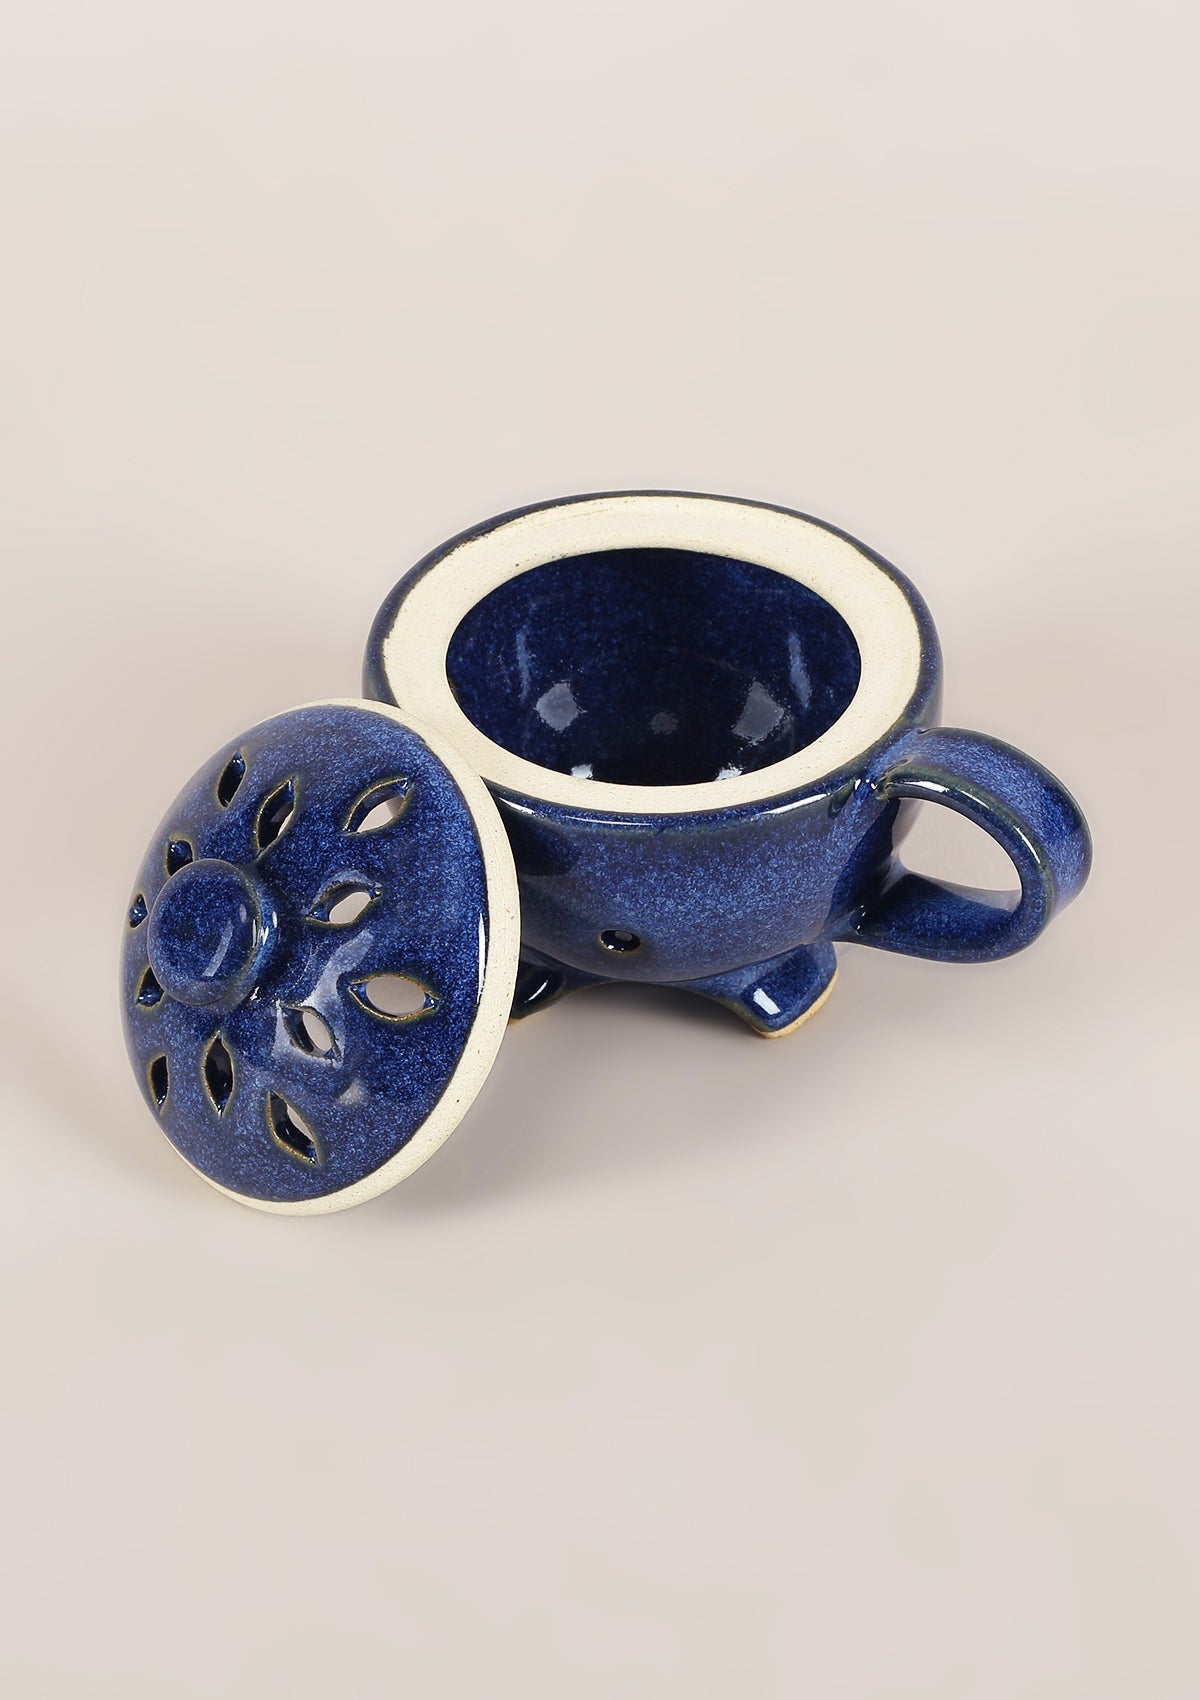 Scented Harmony: IshqMe's Sandal & Musk Dhoop Cones with Artistic Deep Blue Stand